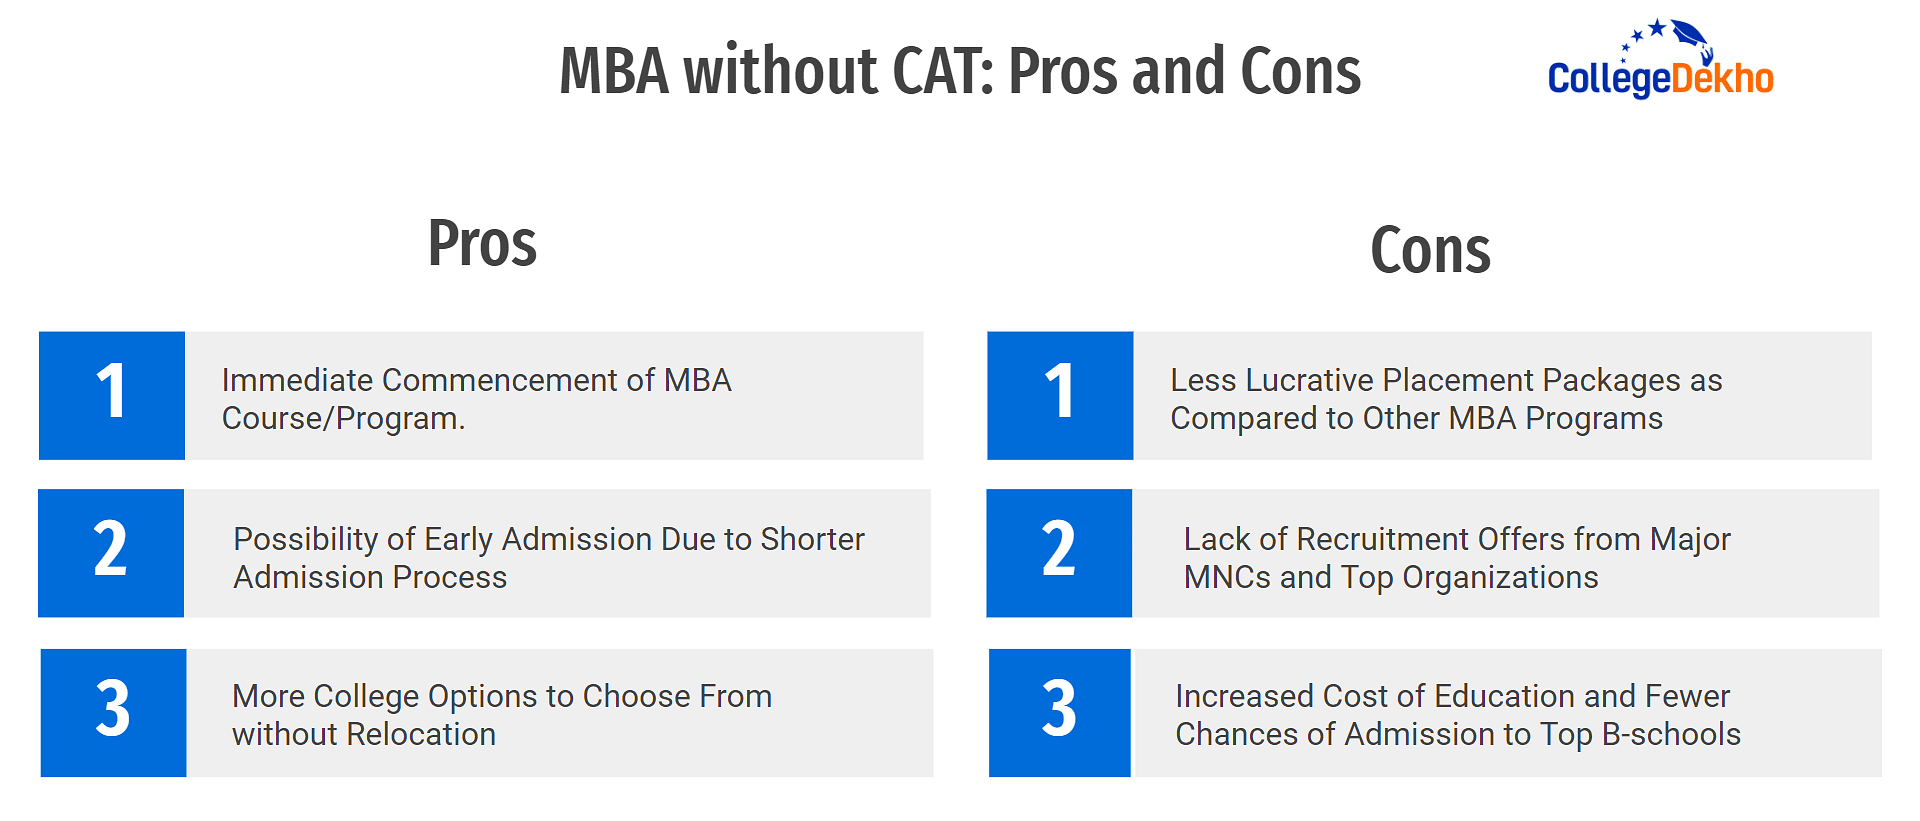 MBA without CAT: Pros and Cons